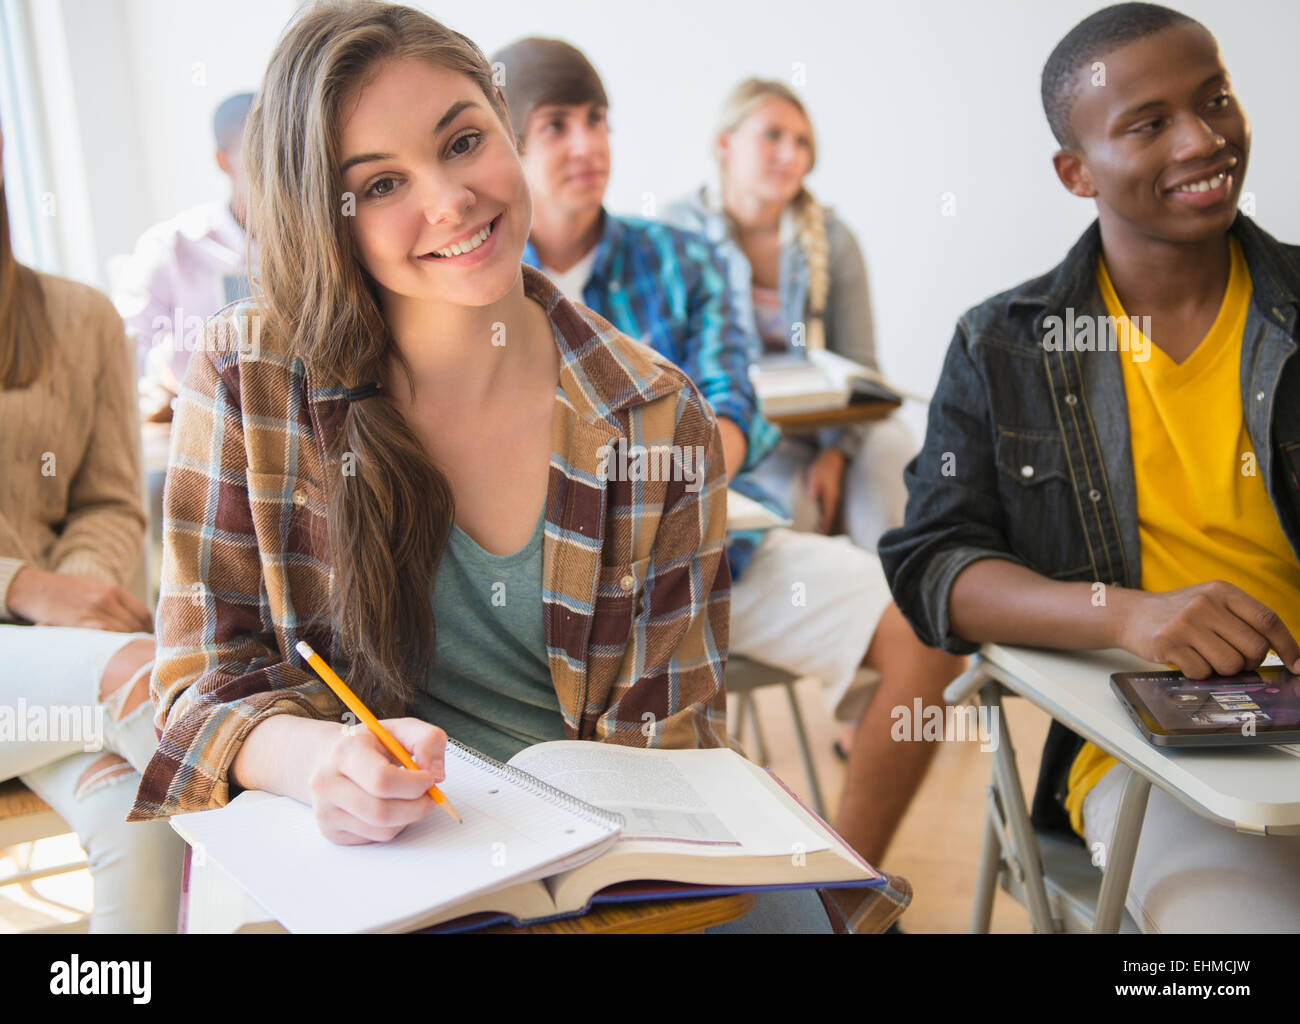 Teenage student smiling in classroom Stock Photo